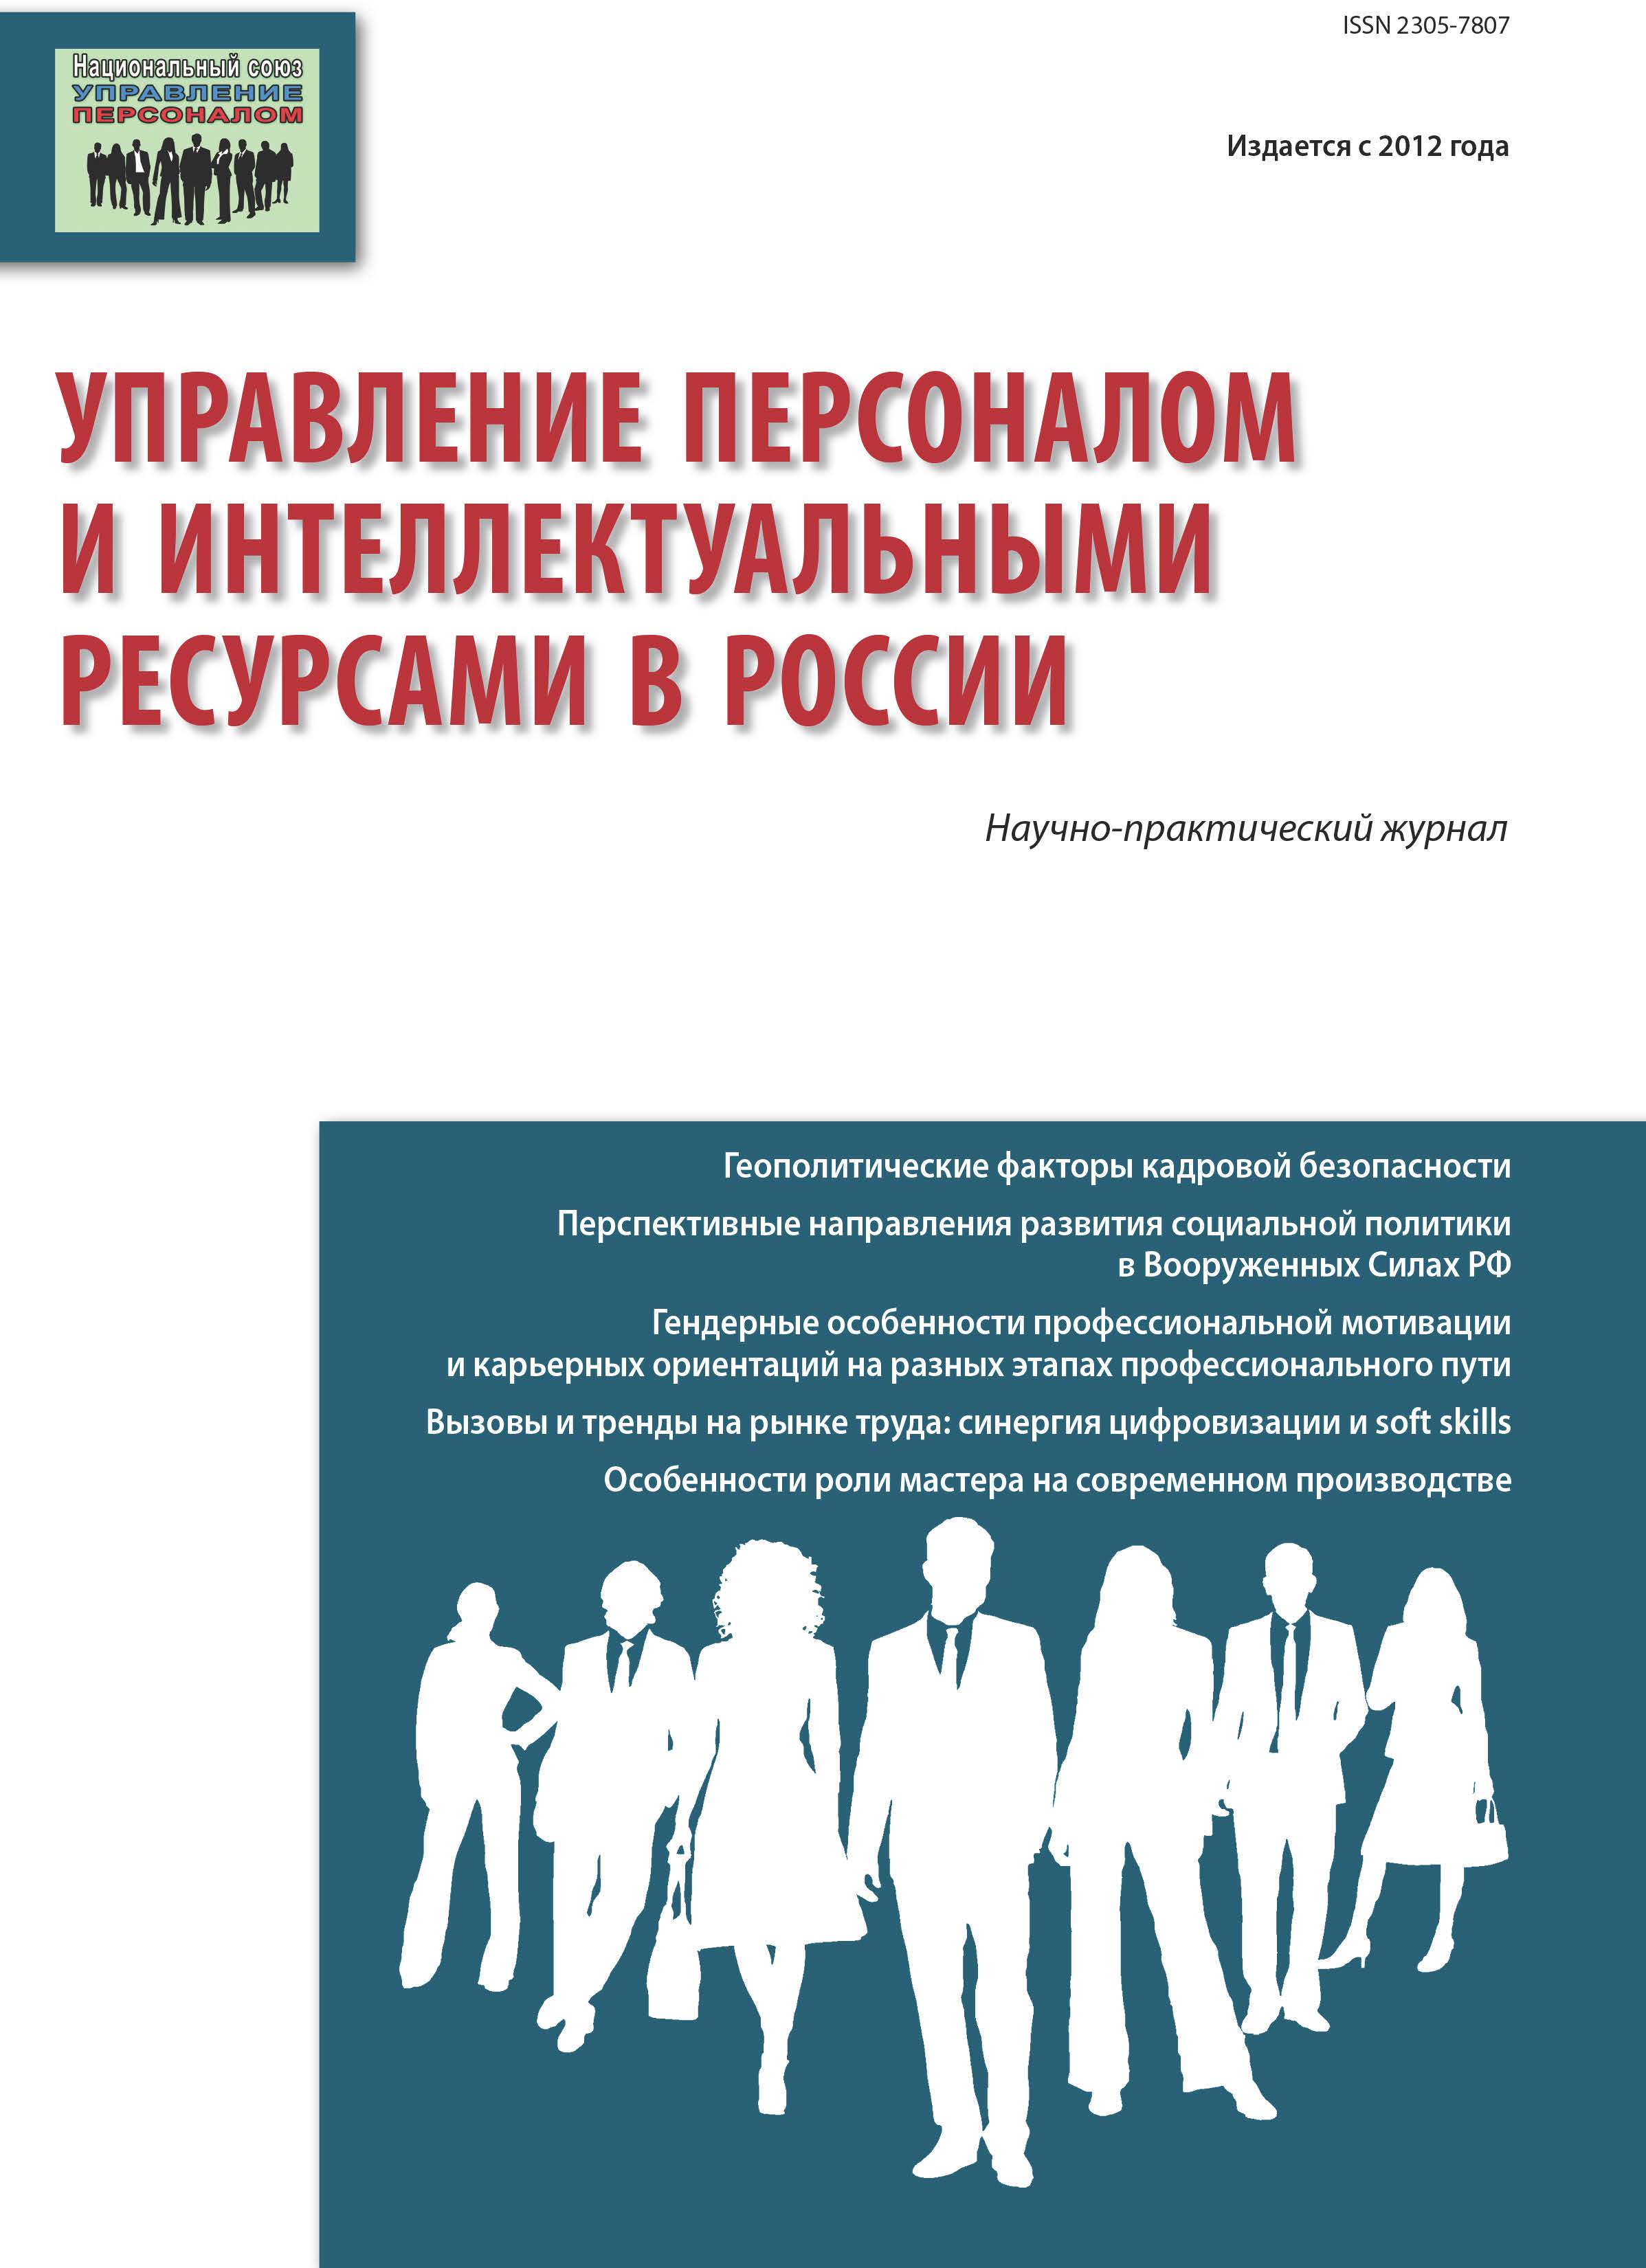                         Management of the Personnel and Intellectual Resources in Russia
            